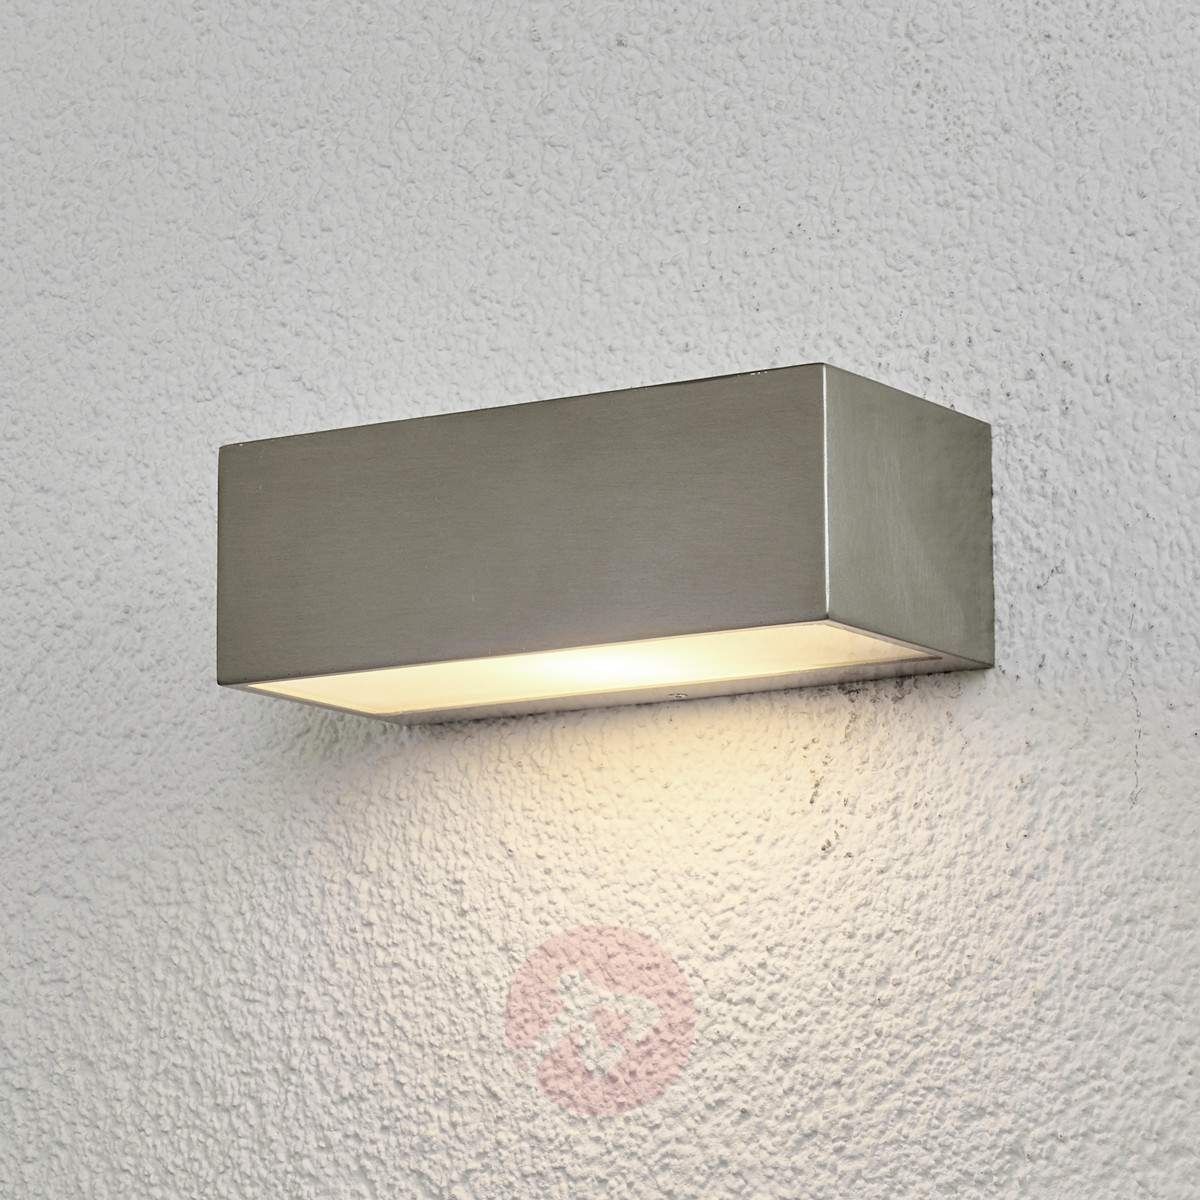 Stainless Steel Outdoor Wall Light Leonora | Lights.co.uk Throughout Stainless Steel Outdoor Wall Lights (Photo 6 of 15)